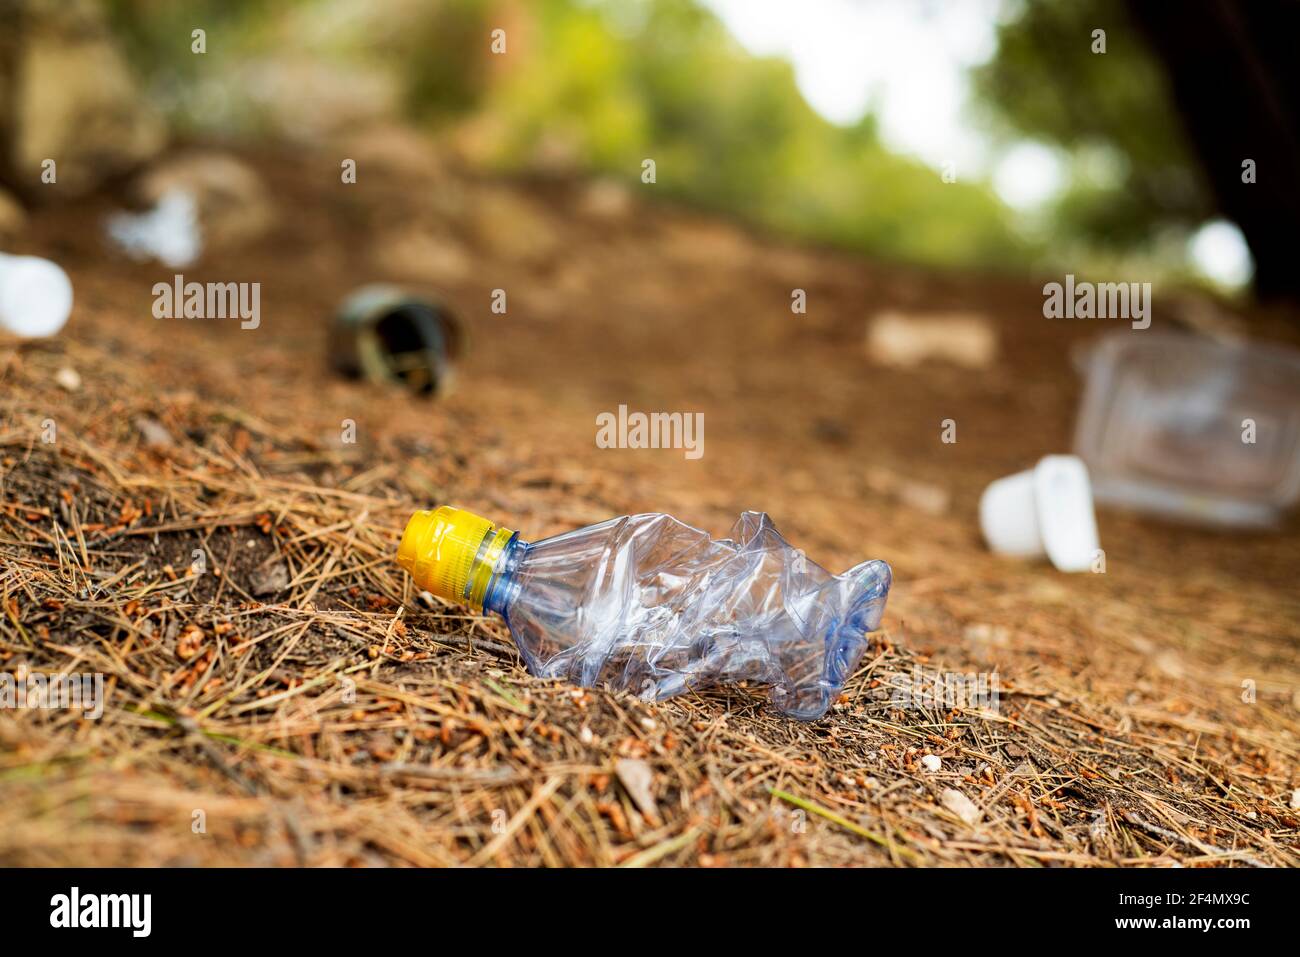 closeup of a used plastic bottle thrown on the ground of a forest, next to some other garbage, such as used food cans and plastic containers Stock Photo